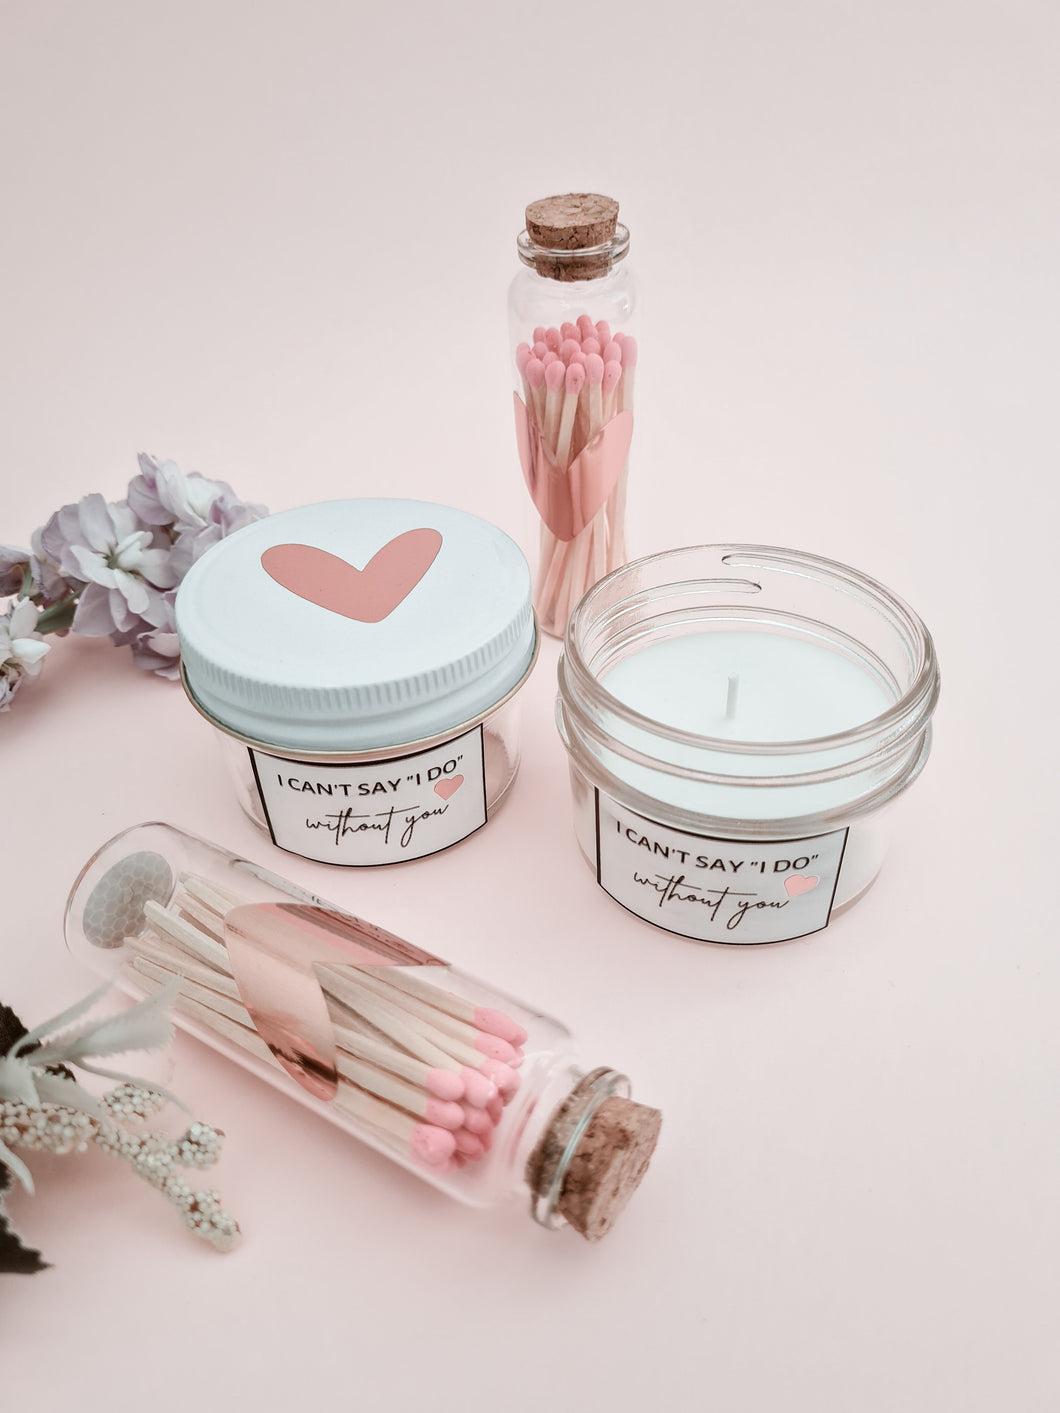 Can't Say I DO candles